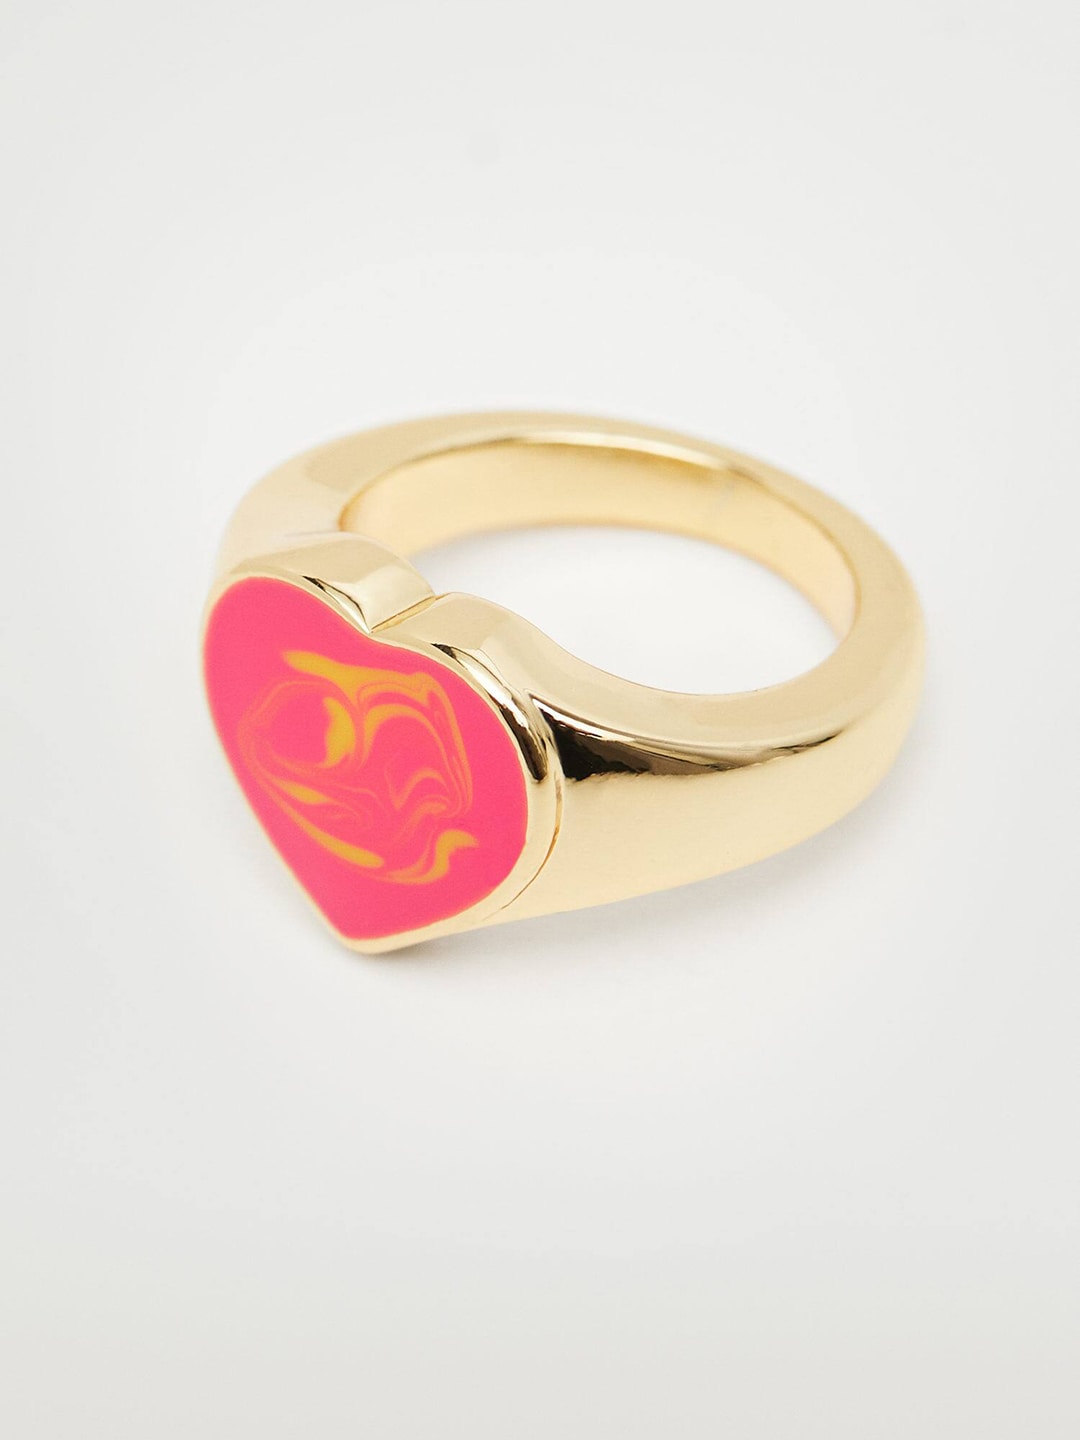 MANGO Women Gold-Toned & Pink Heart Shaped Finger Ring Price in India